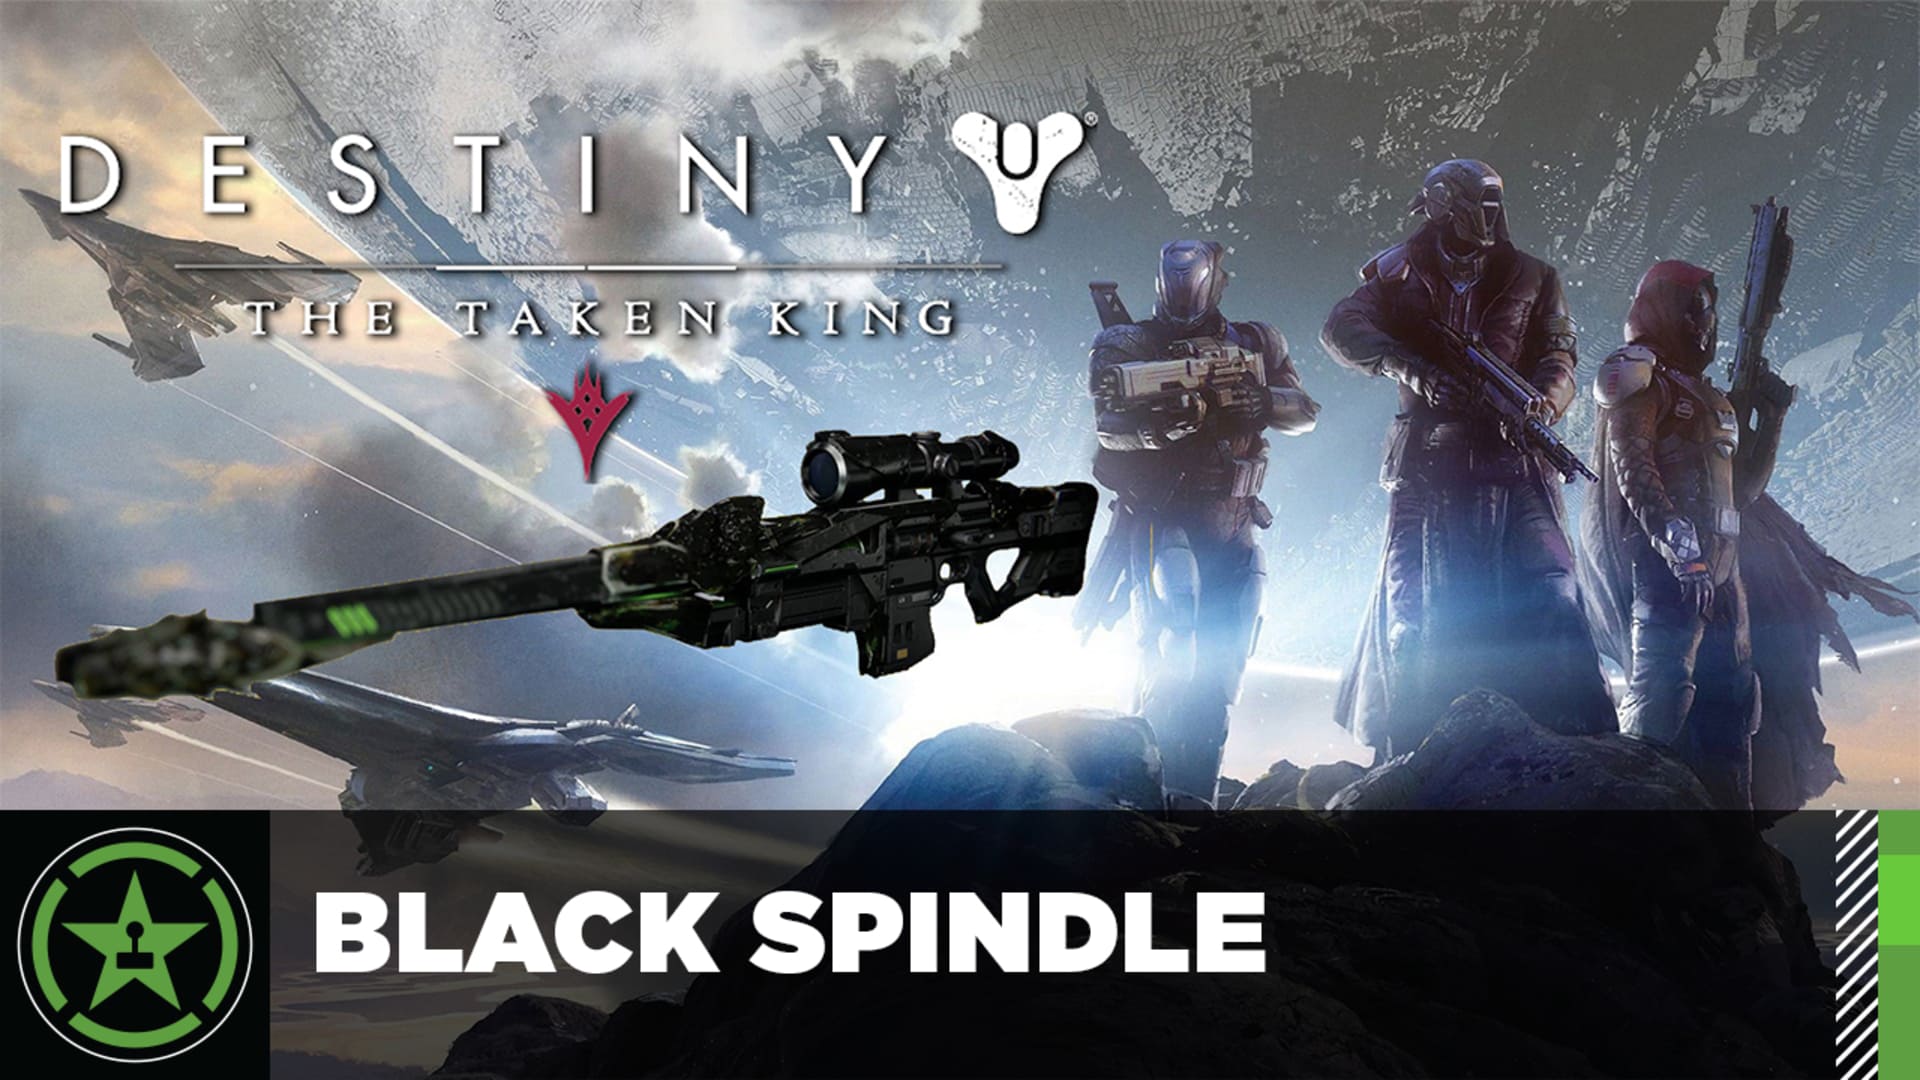 Destiny The Taken King Getting The Black Spindle Rooster